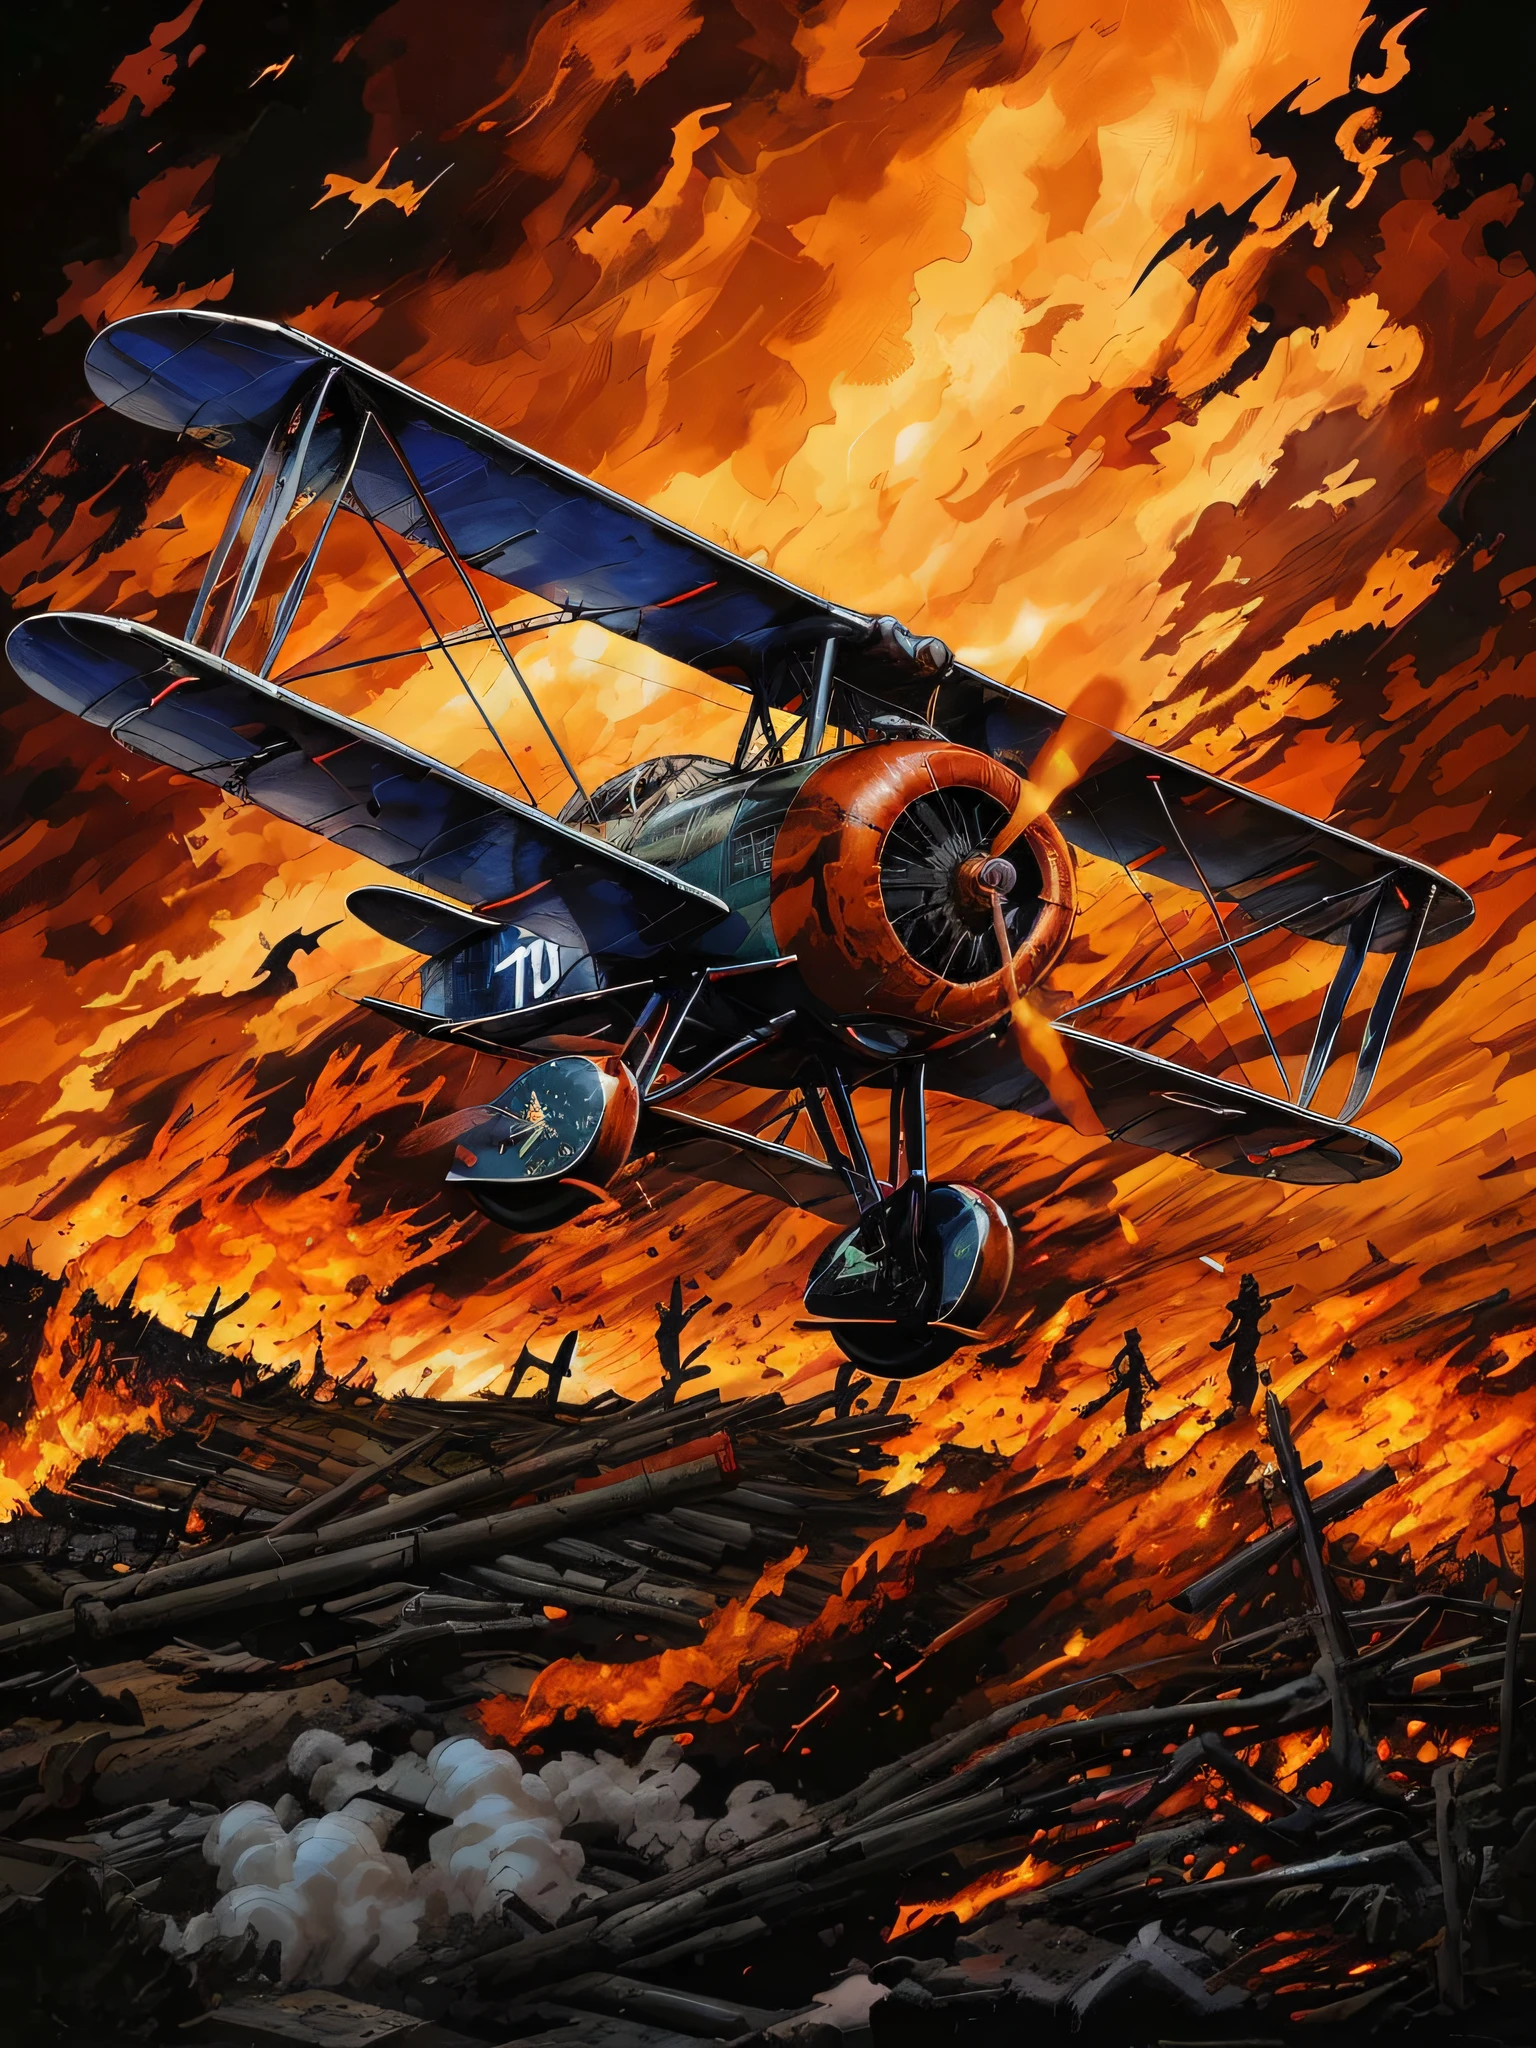 A painting of a biplane flying over a field，The background is flames, author：an illustration of by David B. Mattire, author：Michael Suterfin, author：tim hildebrandt, author：an illustration of by David B. Sorensen, biplane, Embers flying, artwork of a, author：Howard Lyon, author：Joe Yusco, author：Bob Lynnwood, author：Jason Edmiston, Burning battlefield background, Official artwork